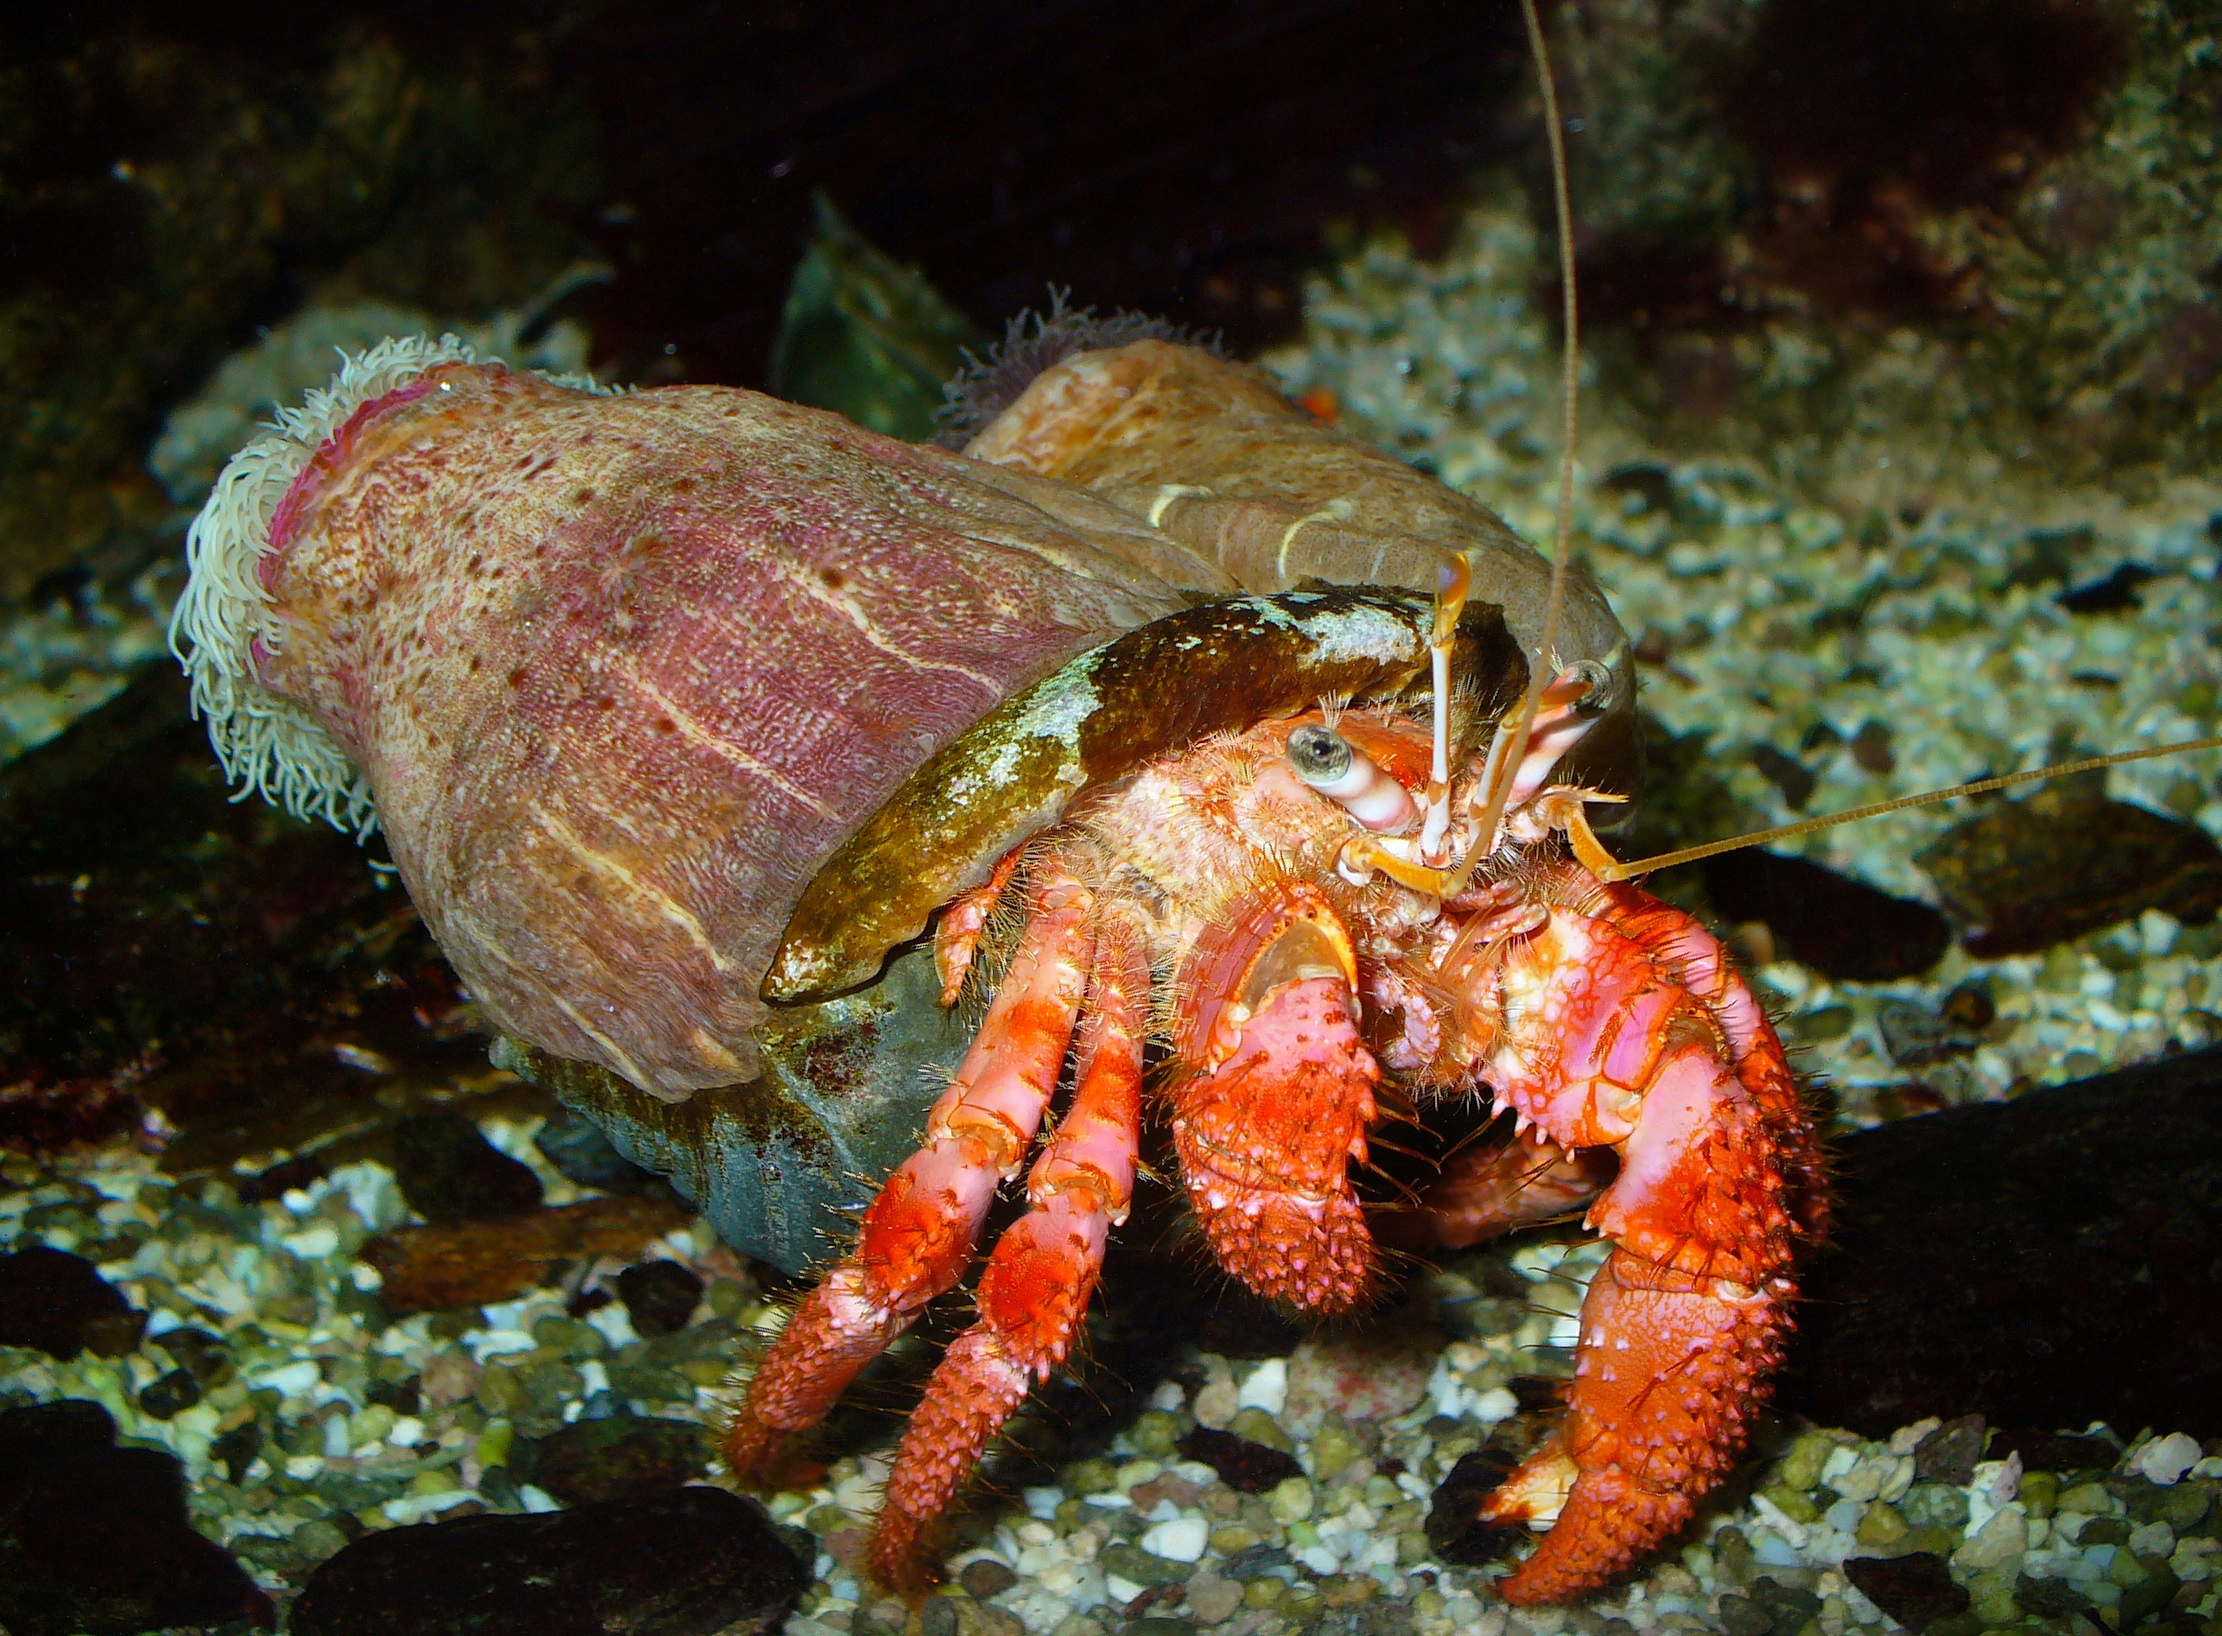 Don't let his soft, cuddly appearance fool you. This hermit crab was (and still is?) a deadly killer.